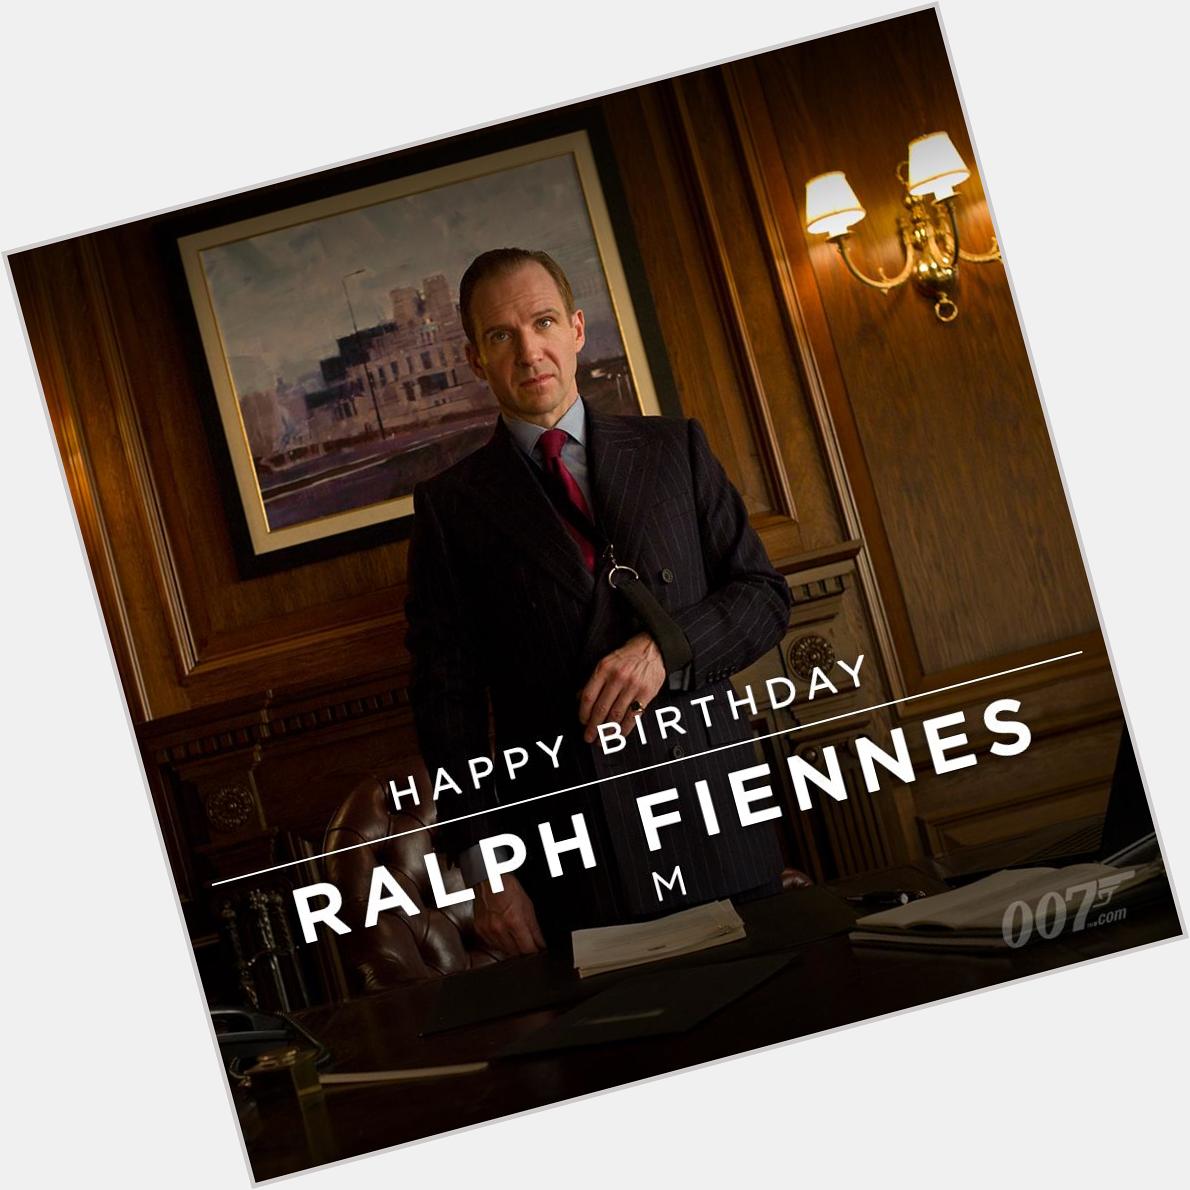 Happy Birthday to Ralph Fiennes who celebrates his birthday today. Ralph will be returning as M in SPECTRE. 